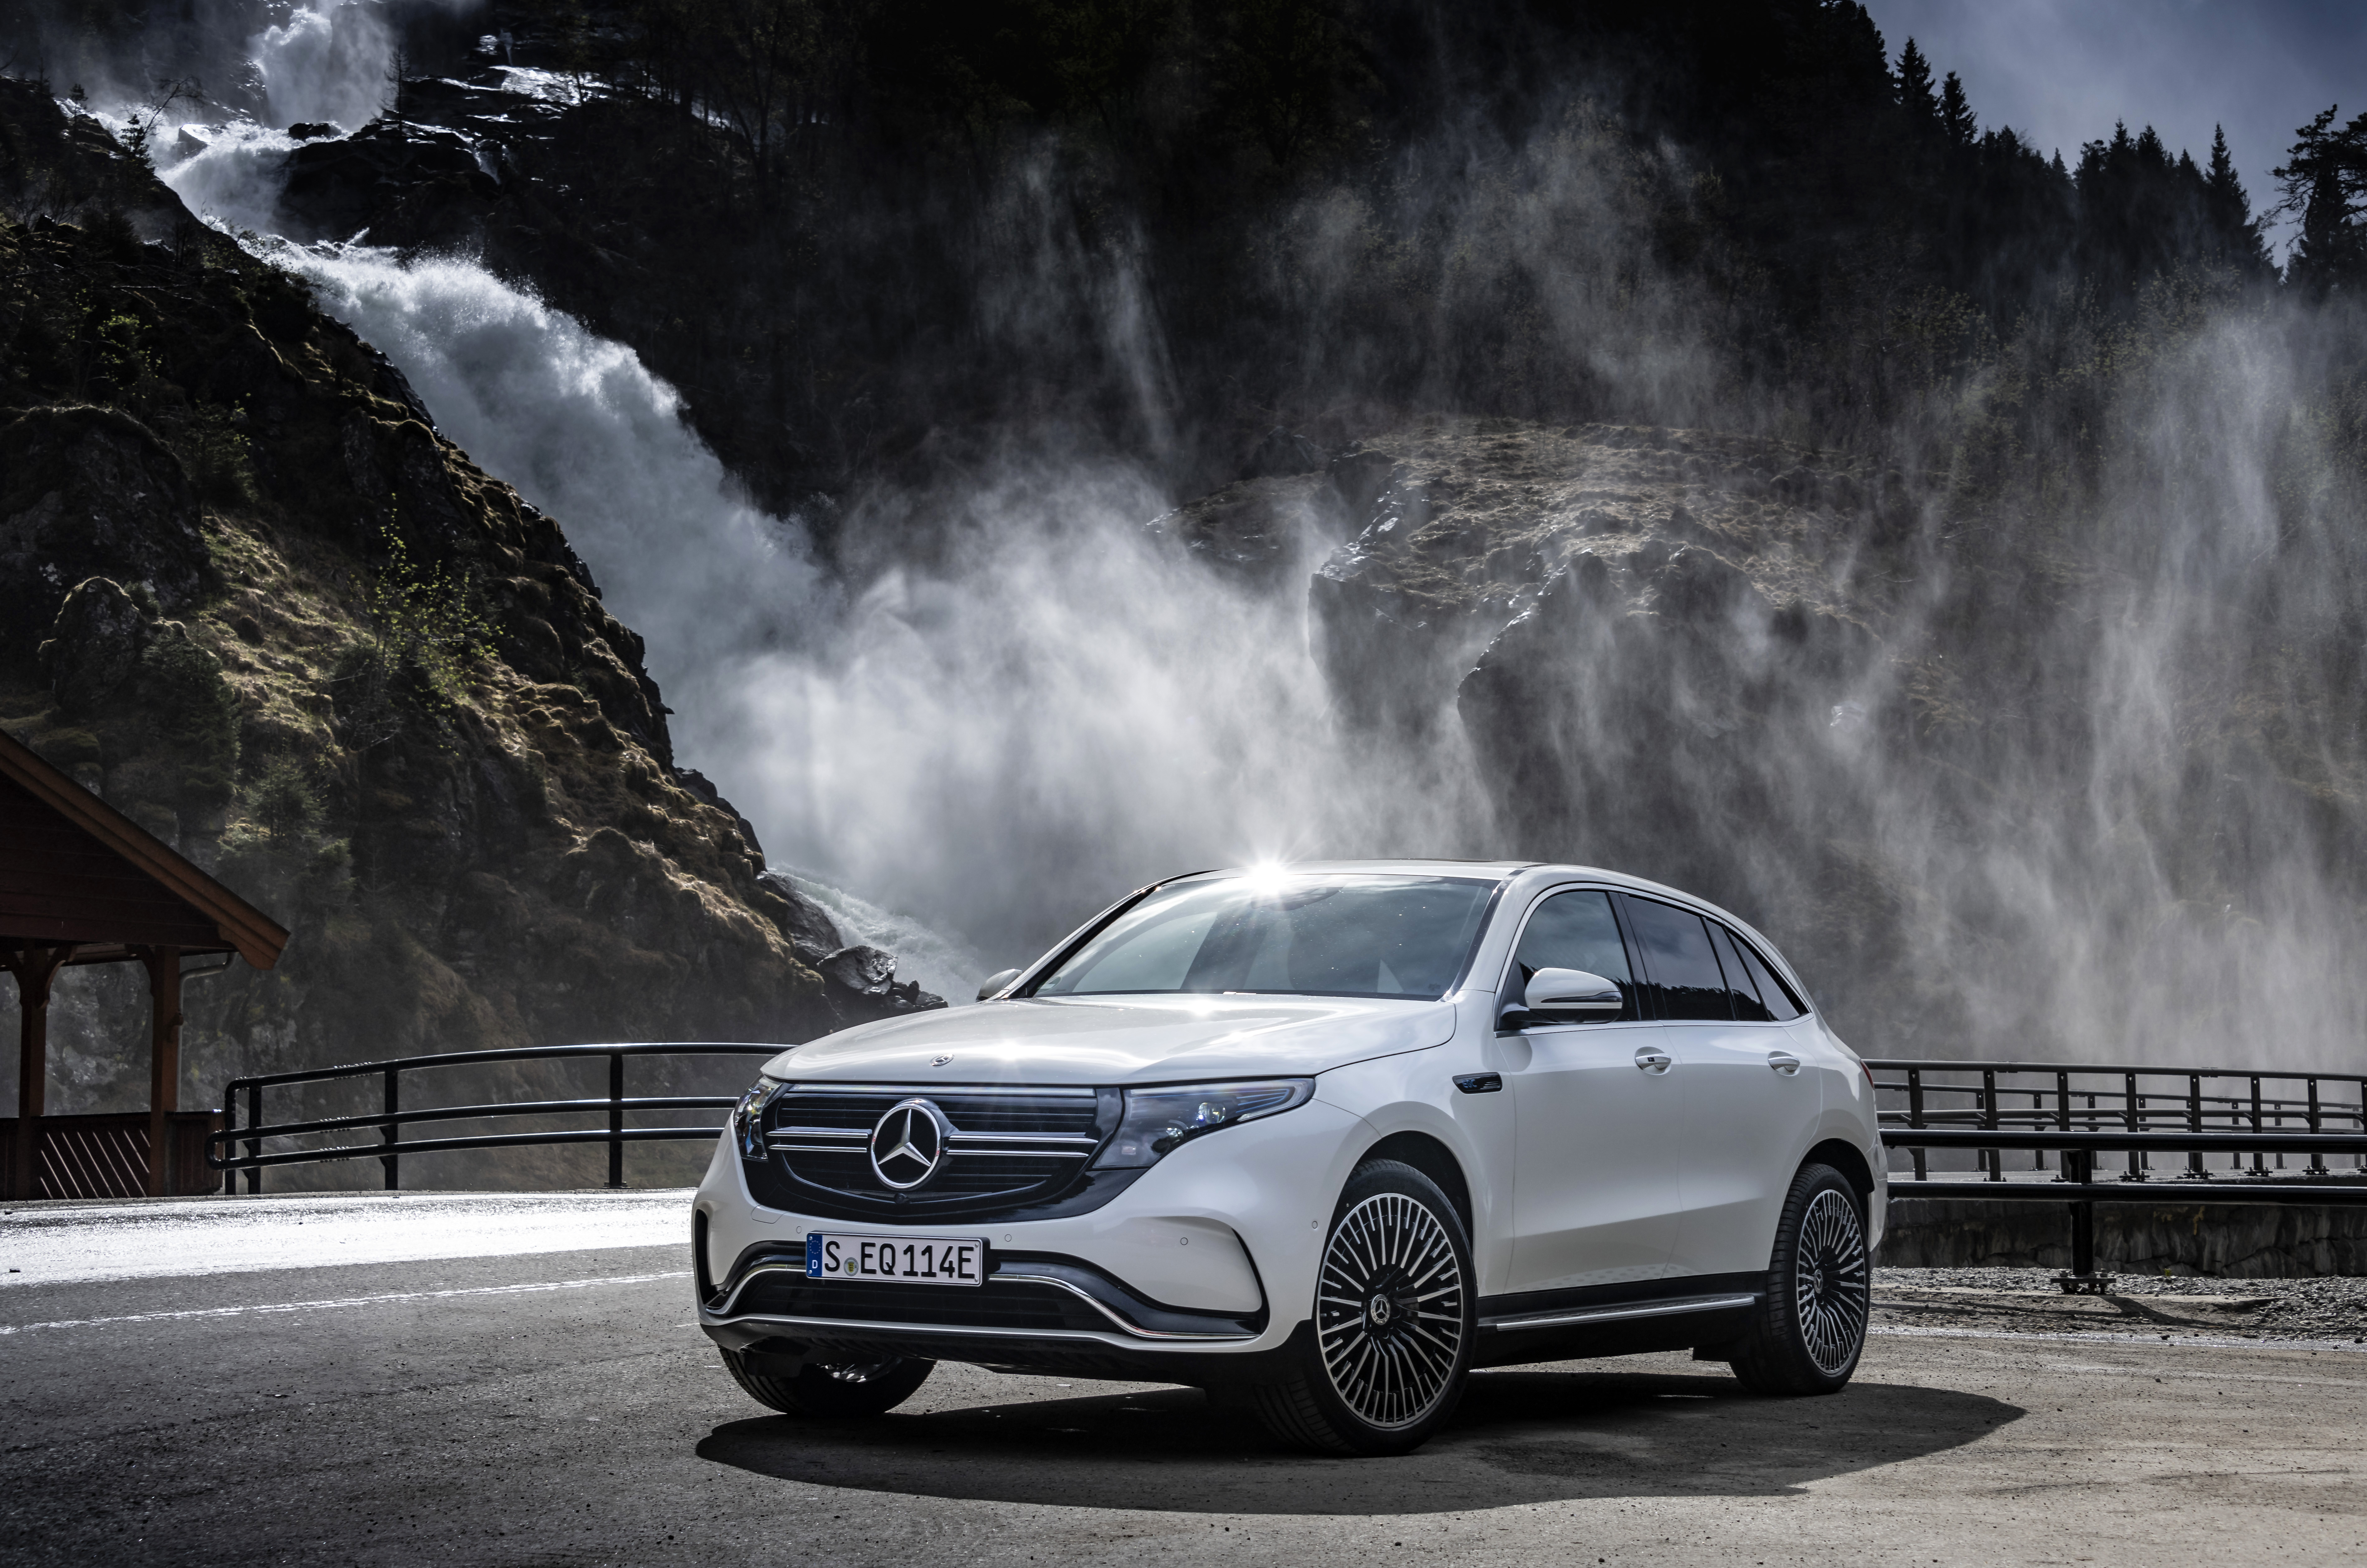 Mercedes prices its all-electric EQC SUV at $67,900